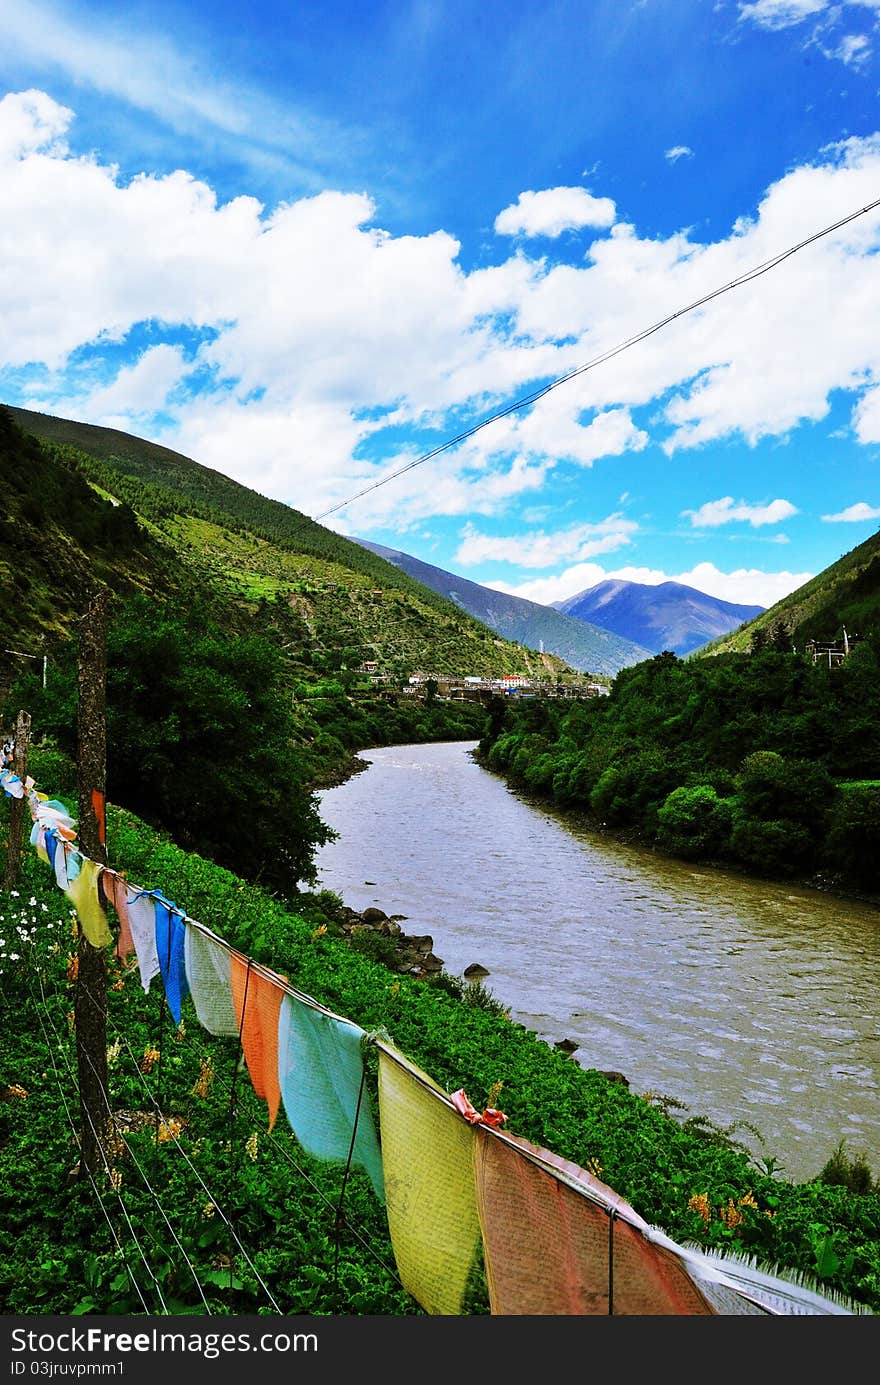 Harmony Western Sichuan Plateau,China  connect religious prayer flags with natural sky, river and hills.